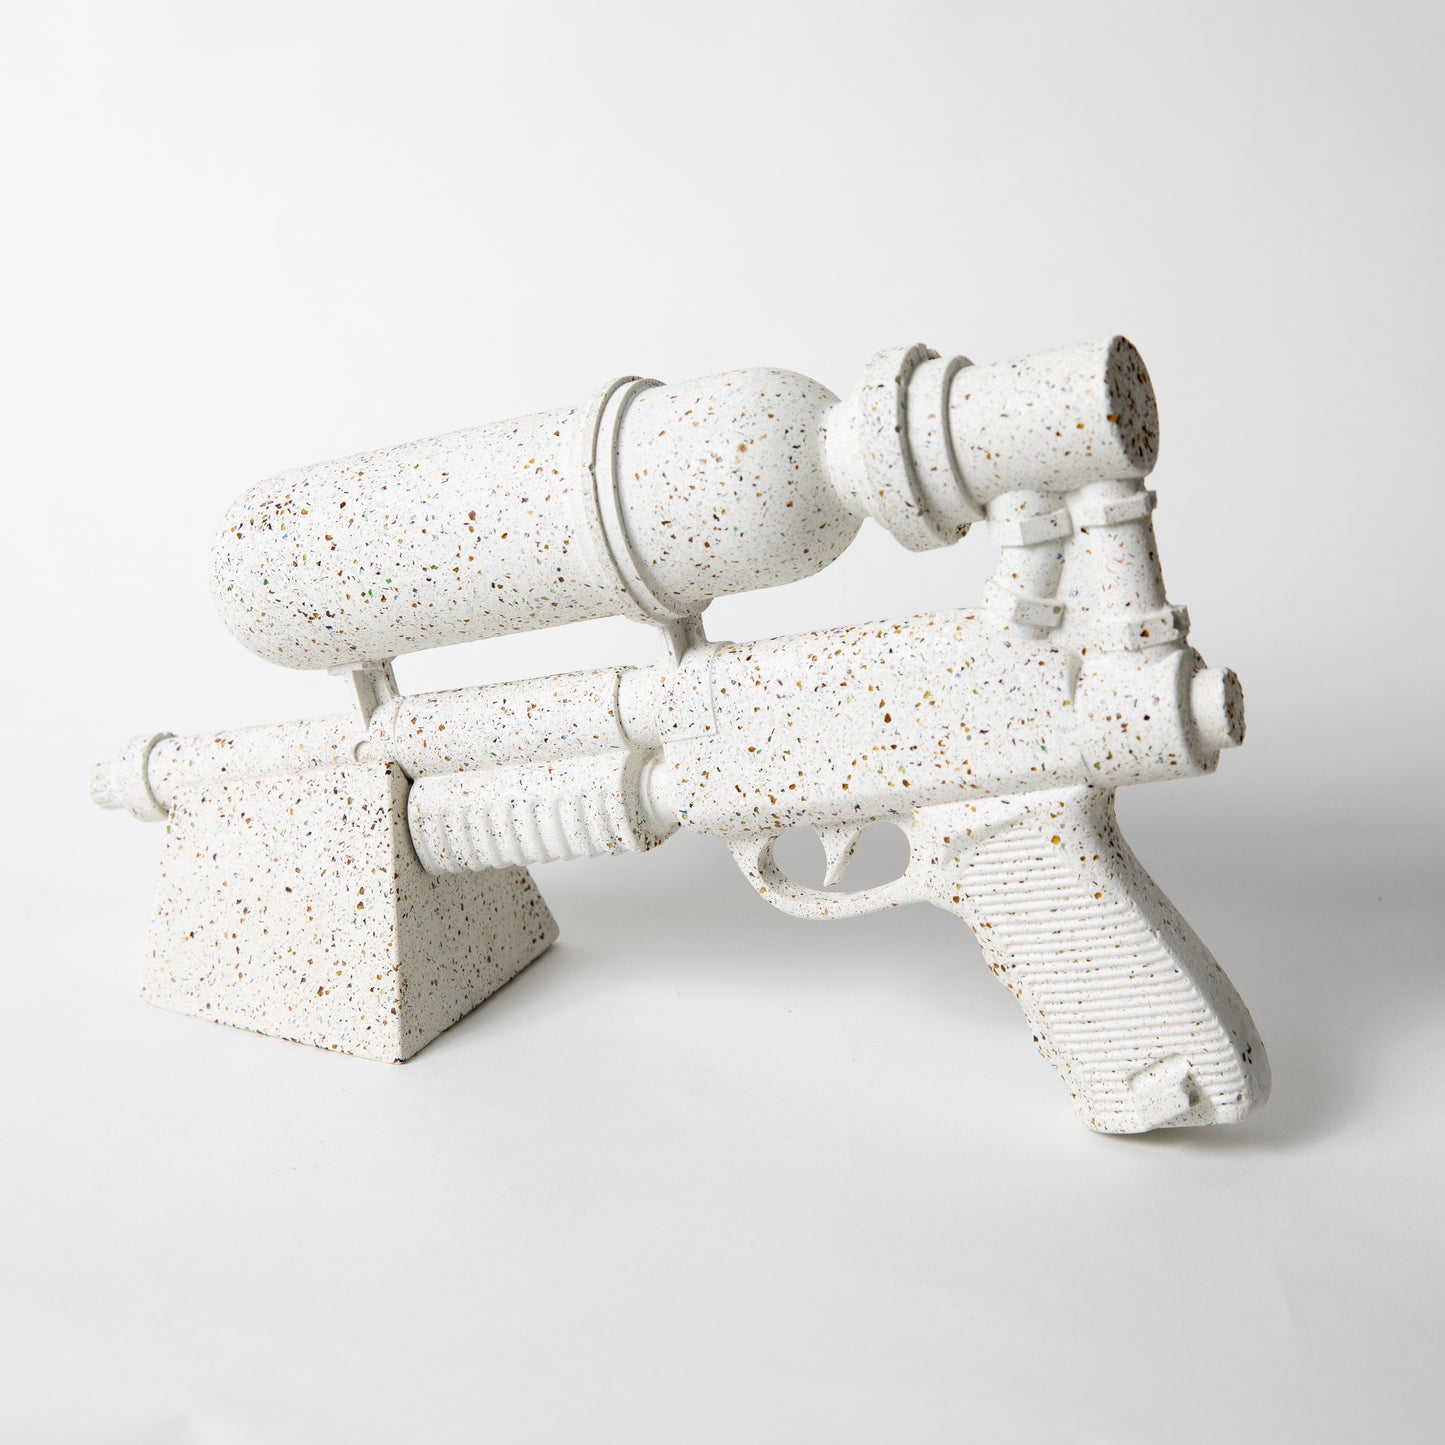 The Ultra Sprayer Sculpture in White Terrazzo, resting on a stand.